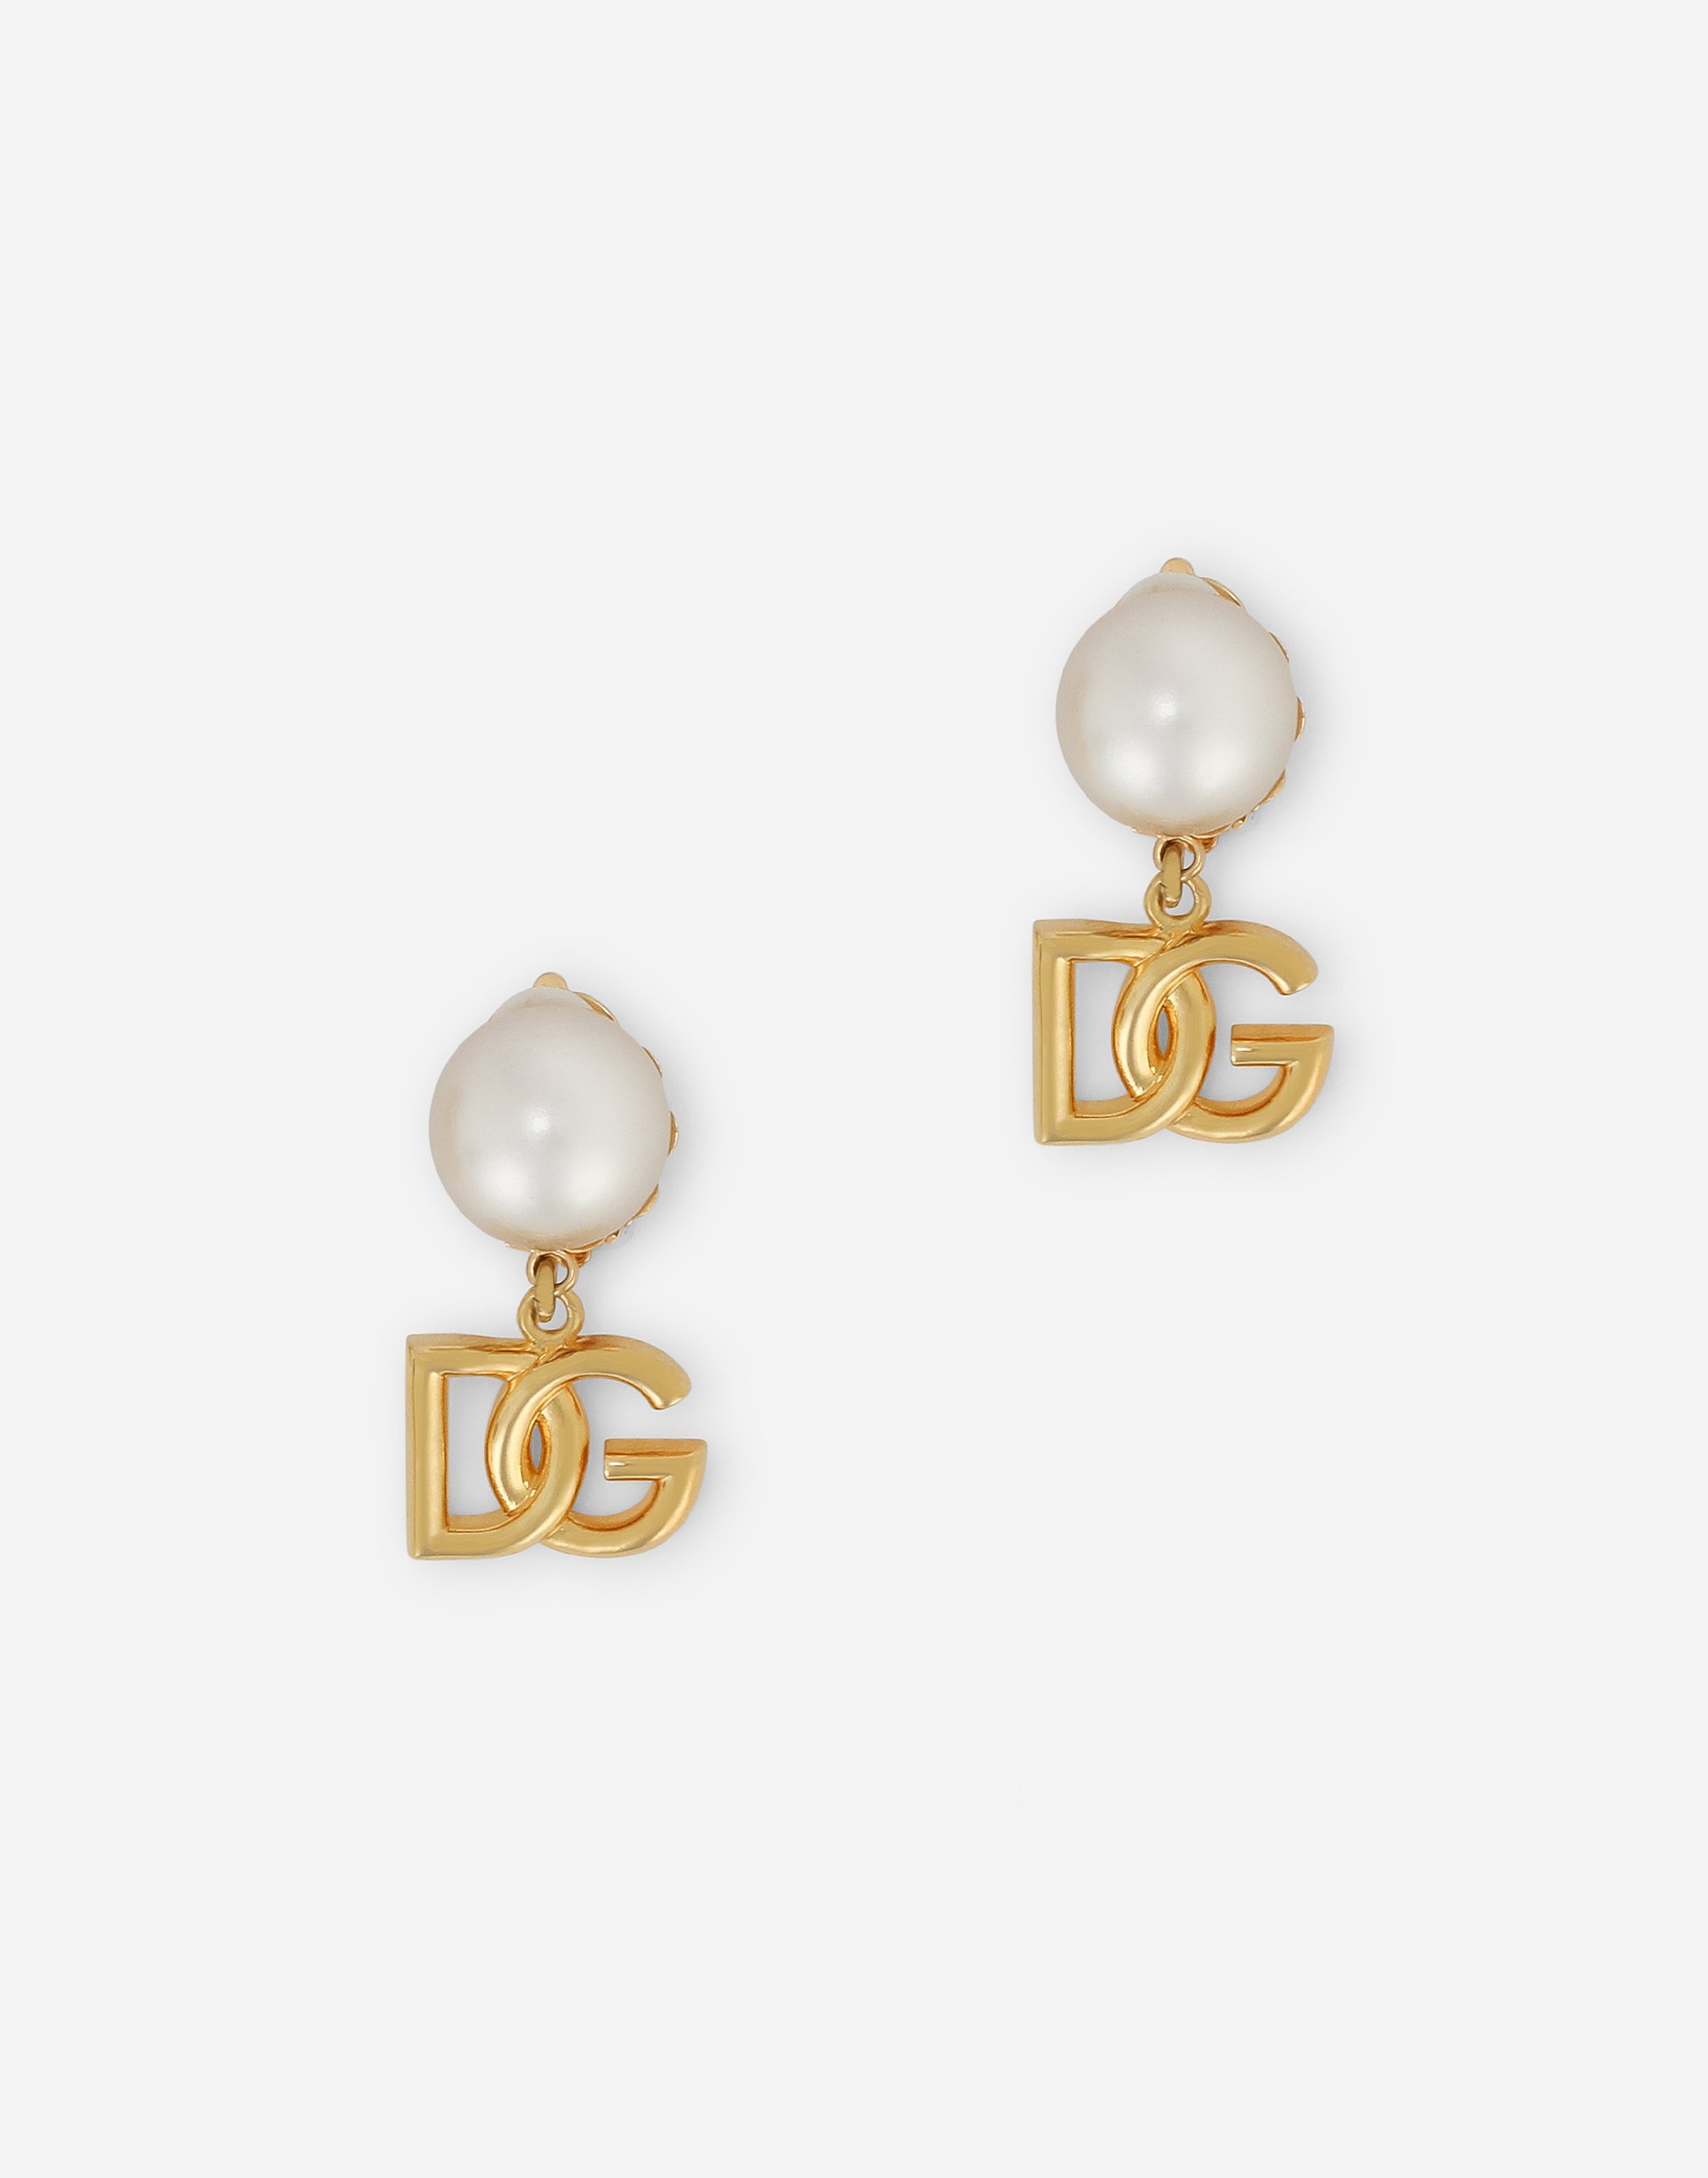 Earrings with DG logo and pearl in Gold